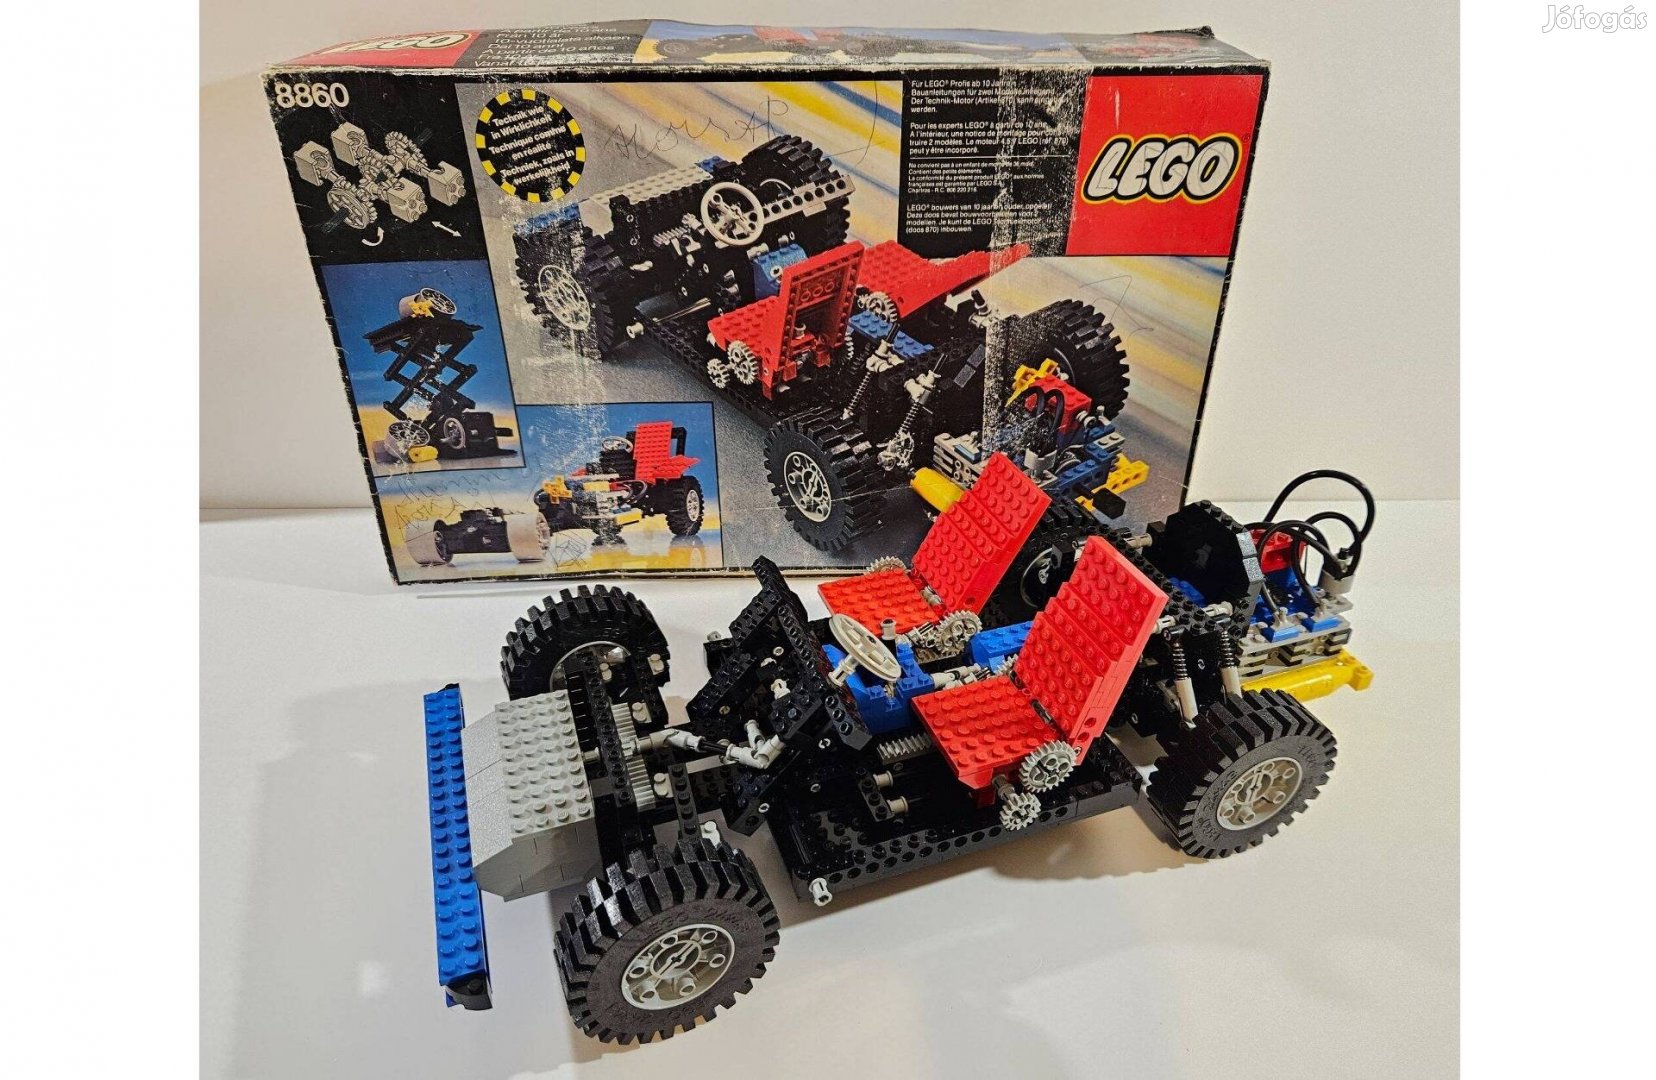 LEGO Technic - 8860 - Car Chassis (Auto Chassis)